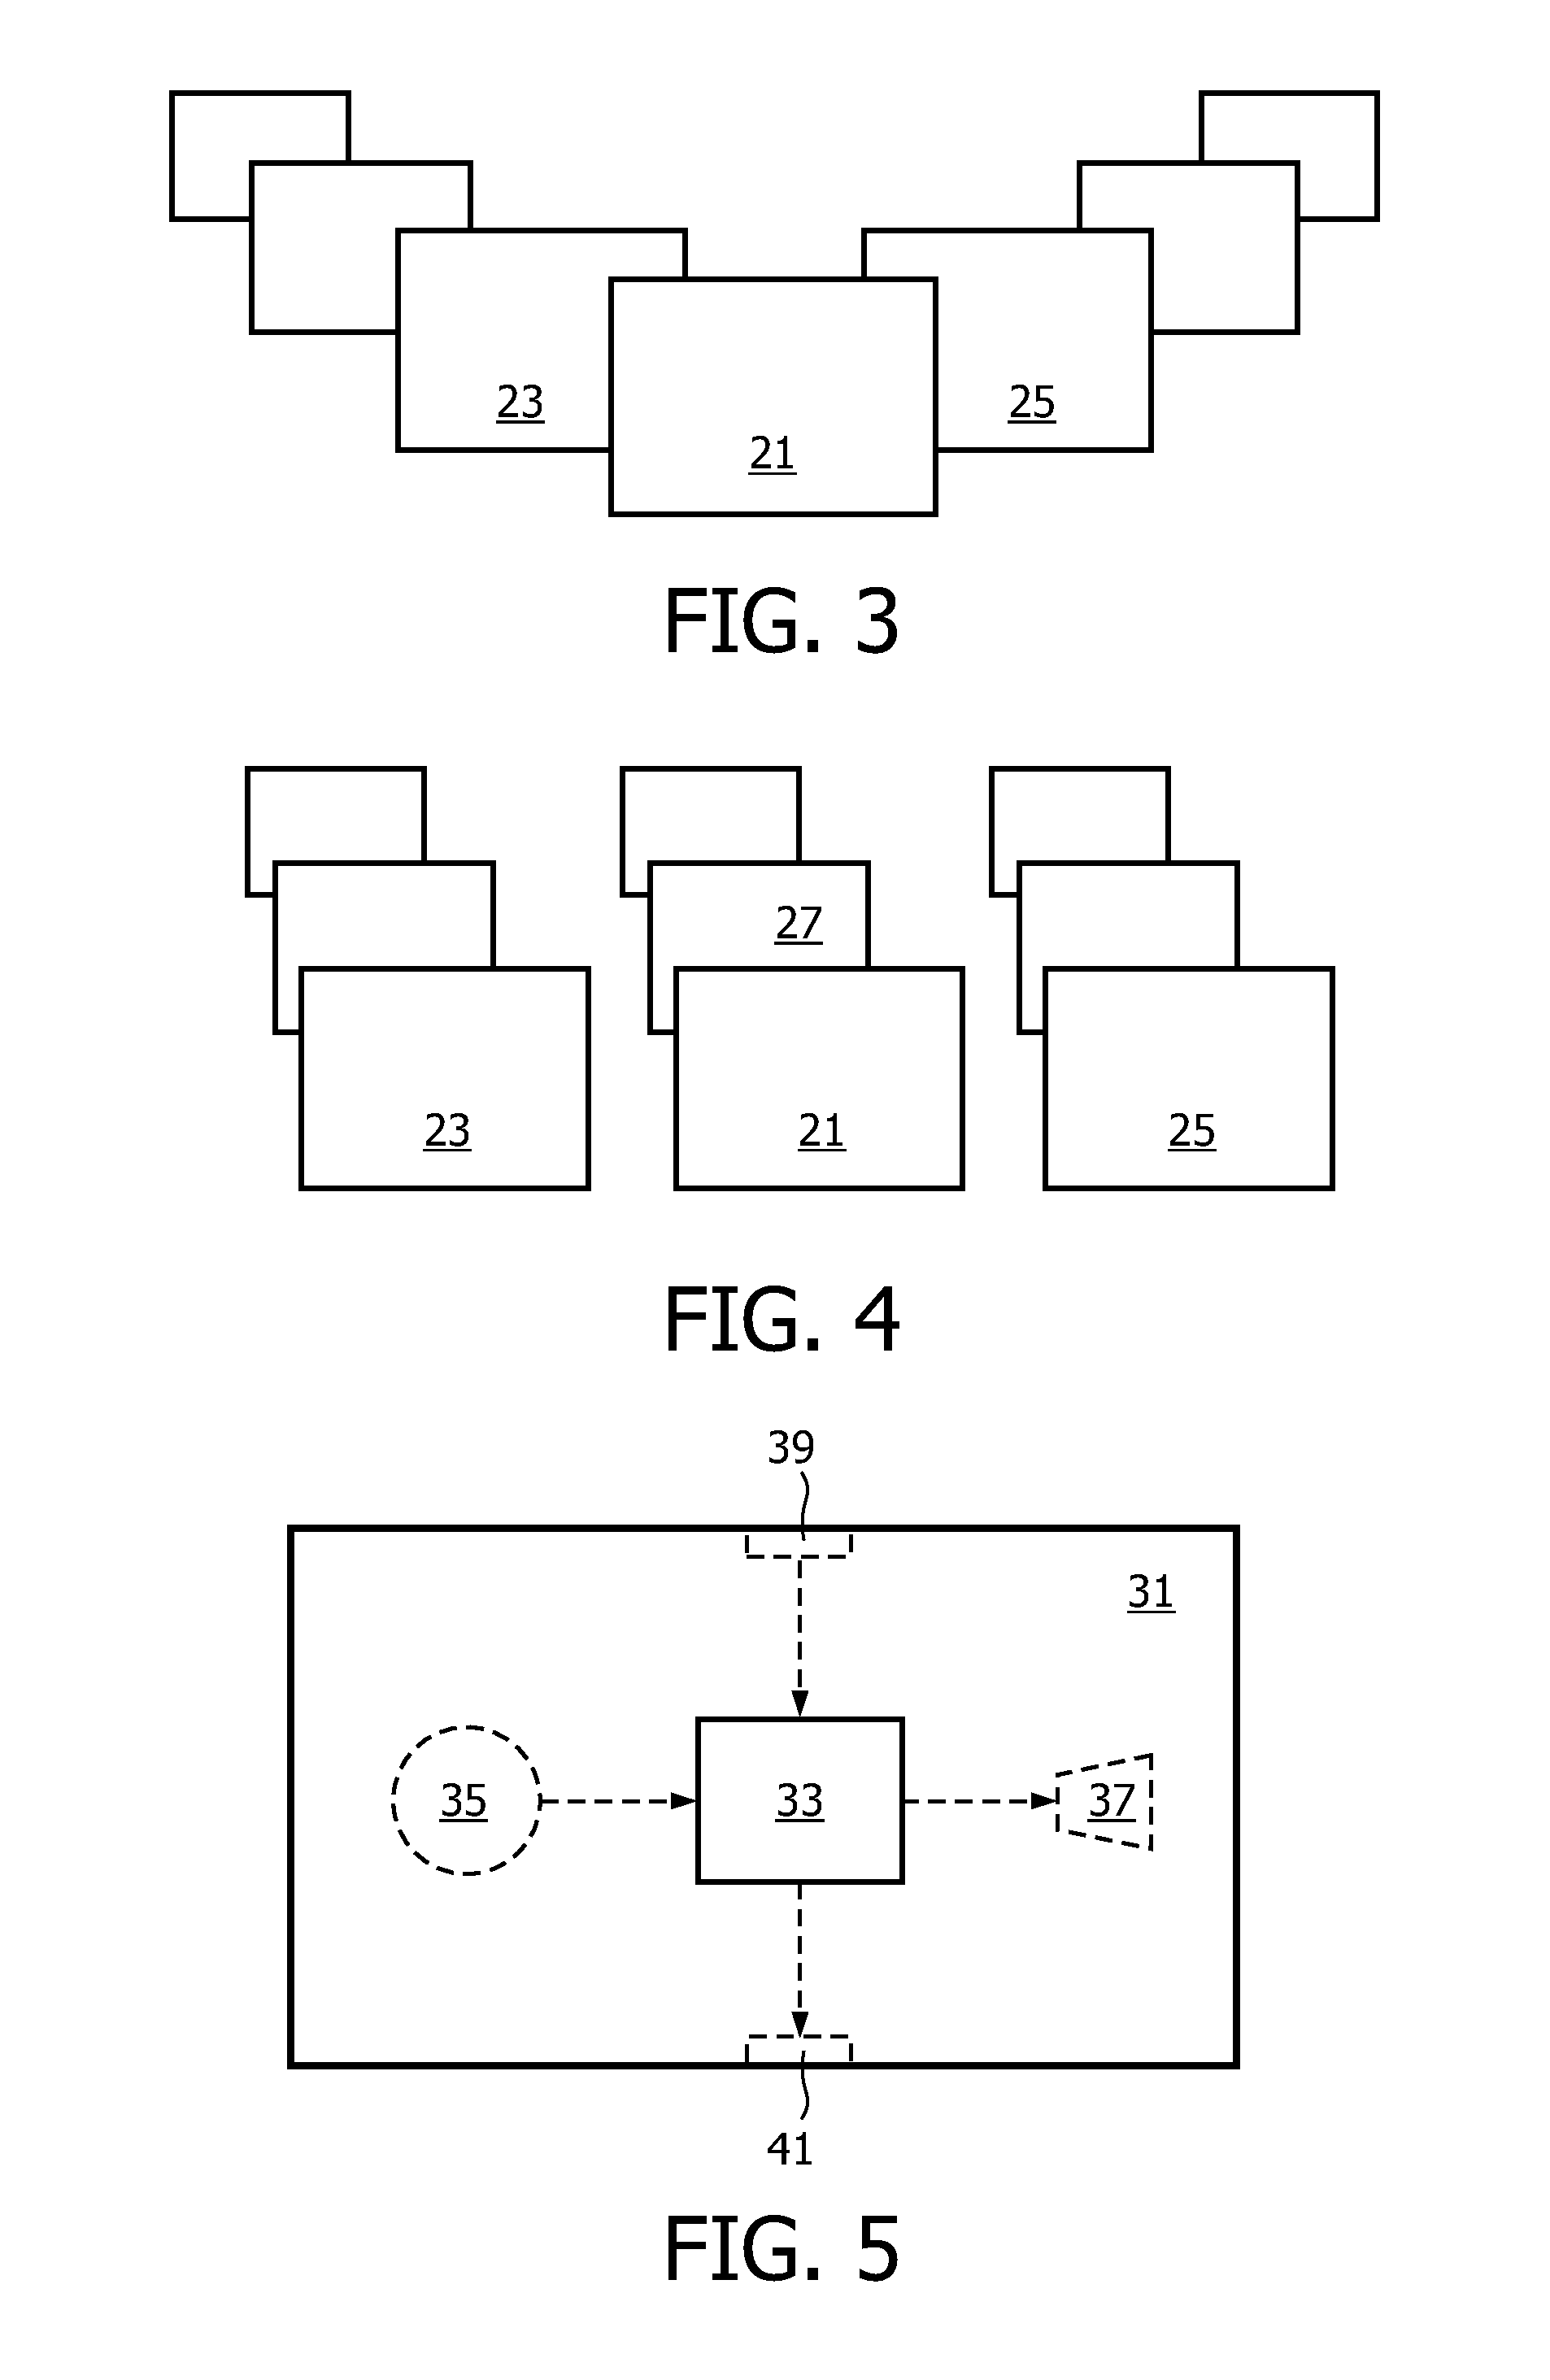 Method and device for enabling selection of an item from a plurality of items